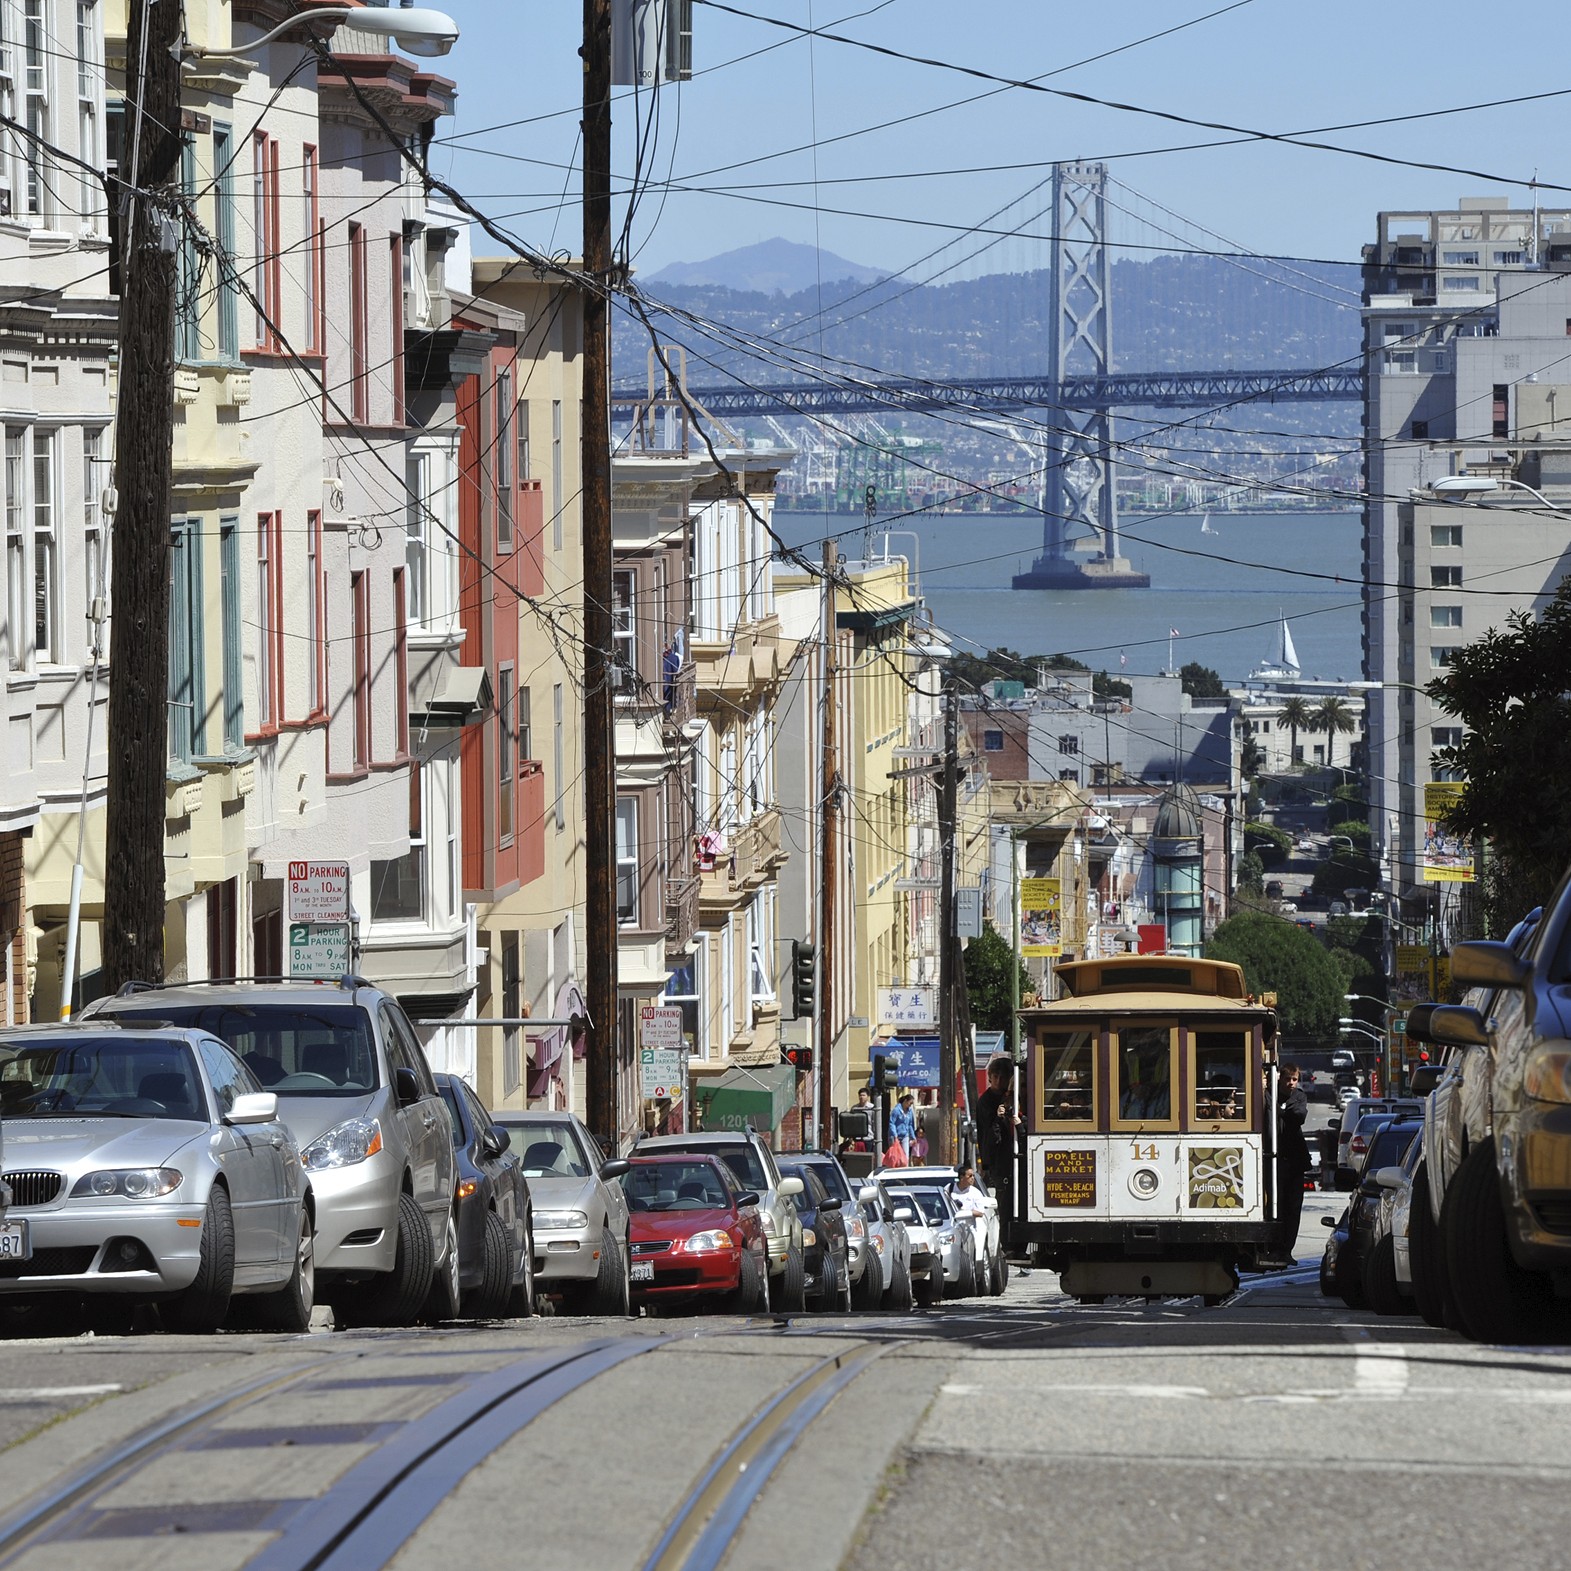 A residential street in San Francisco where the Bay Bridge can be seen in the background